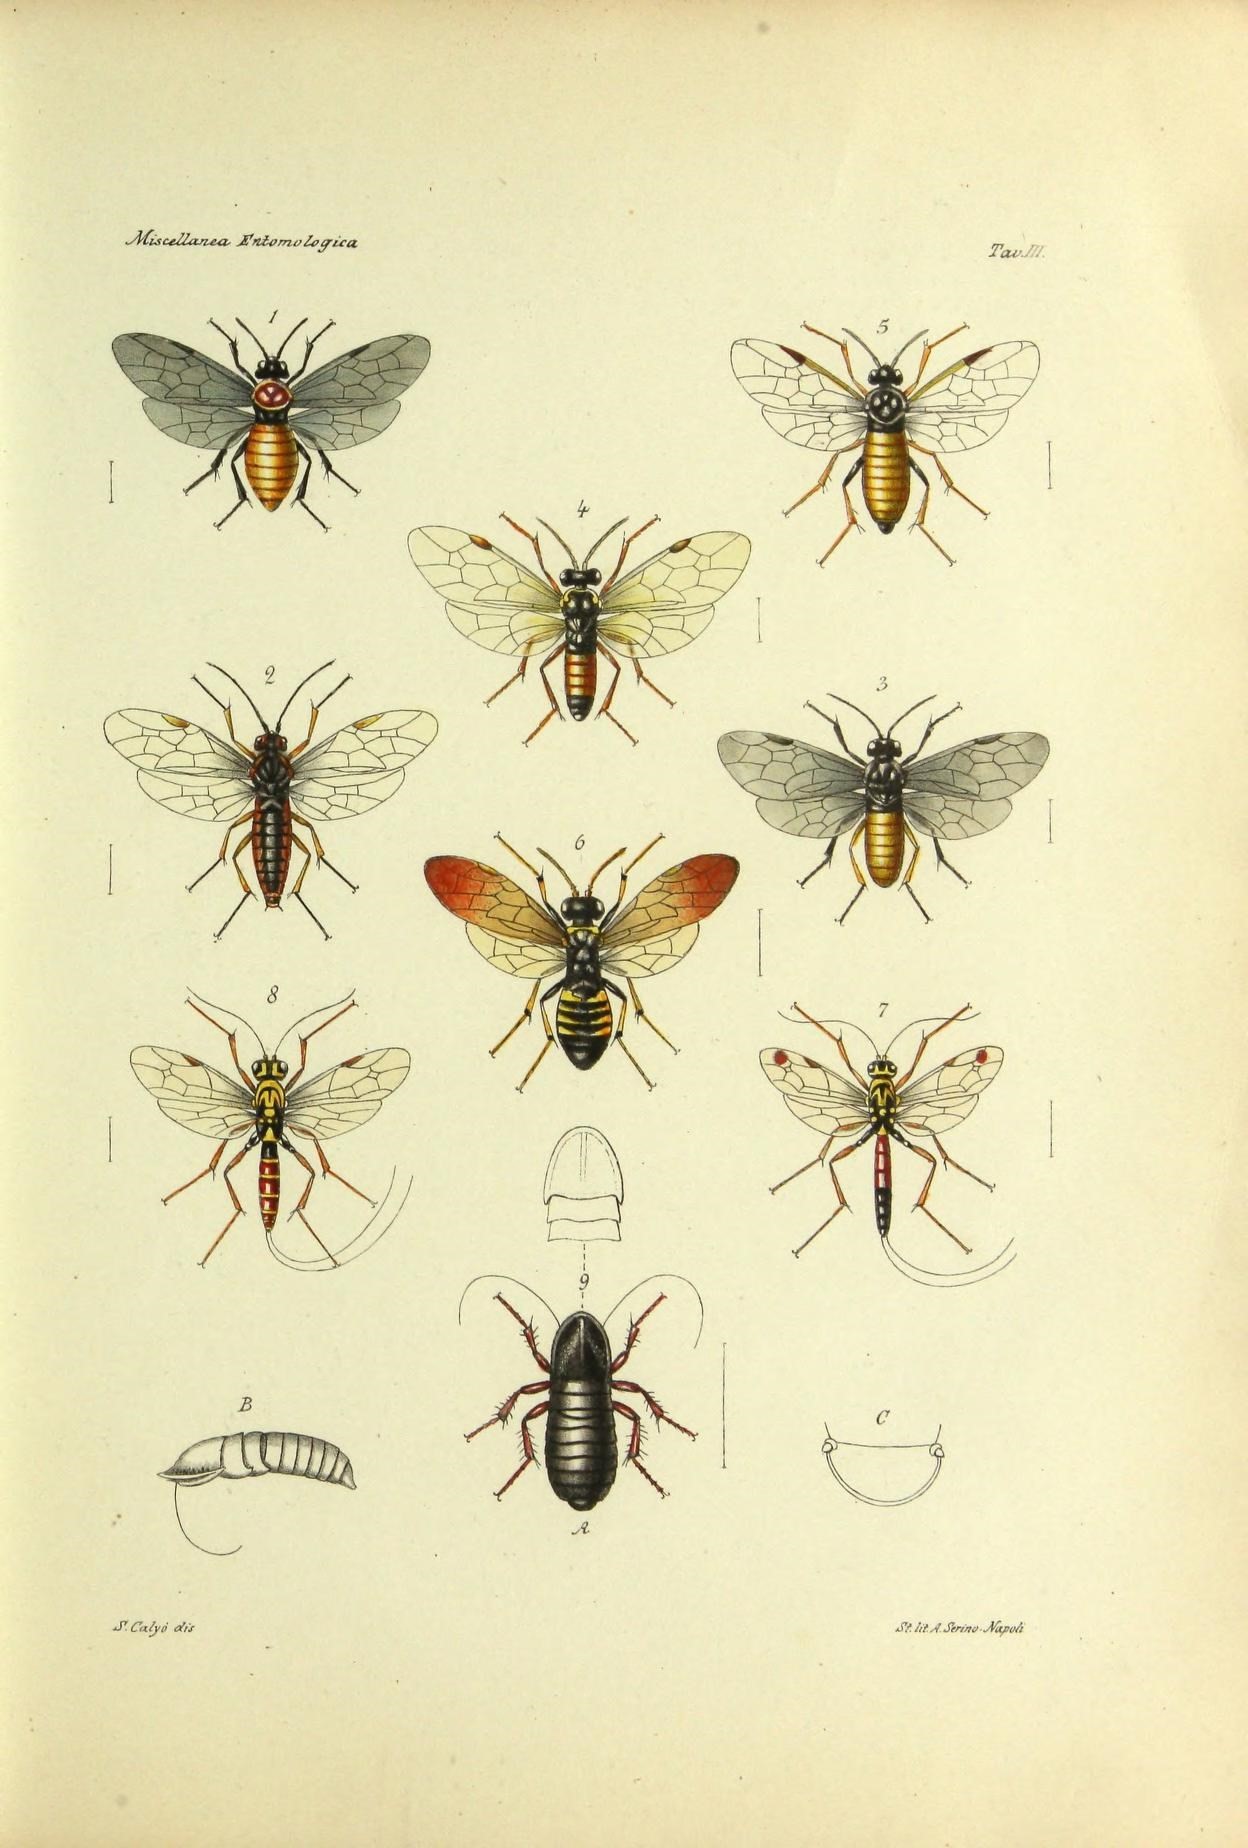 a variety of bees on various stages of development